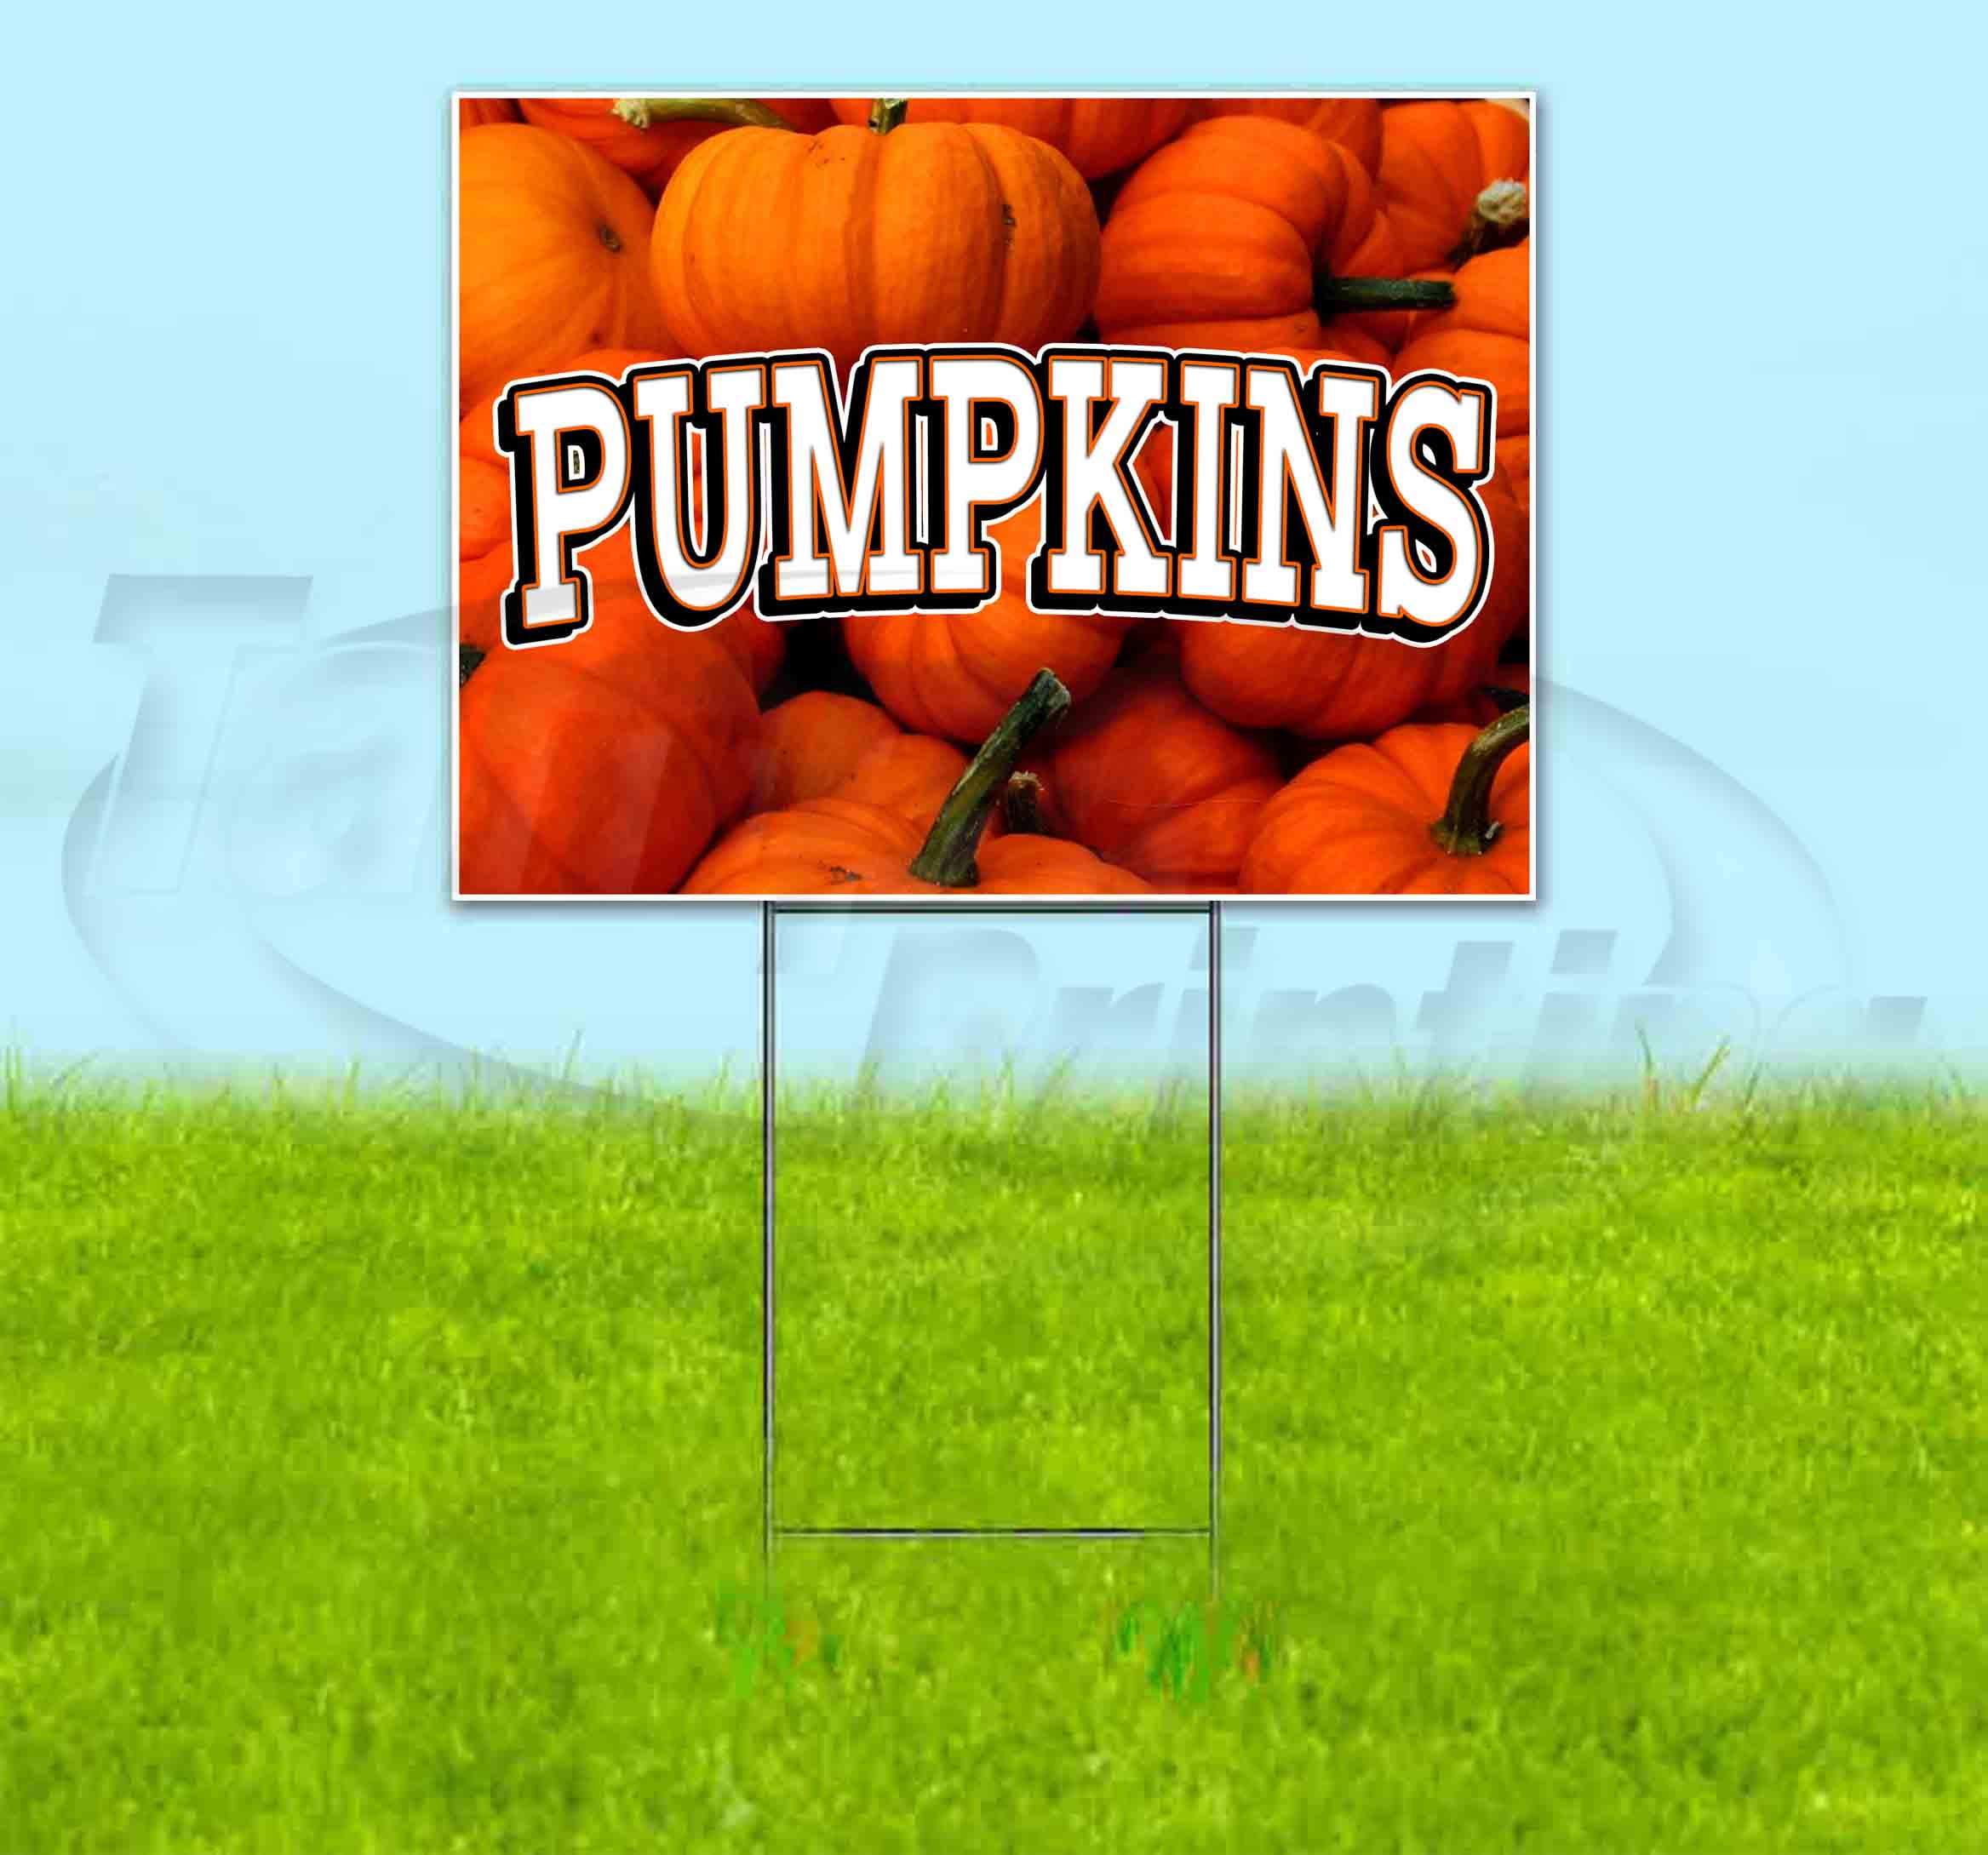 18"x24" Pumpkins For Sale  Yard Sign  Holiday Pumpkin Patch  Retail Store Sign 